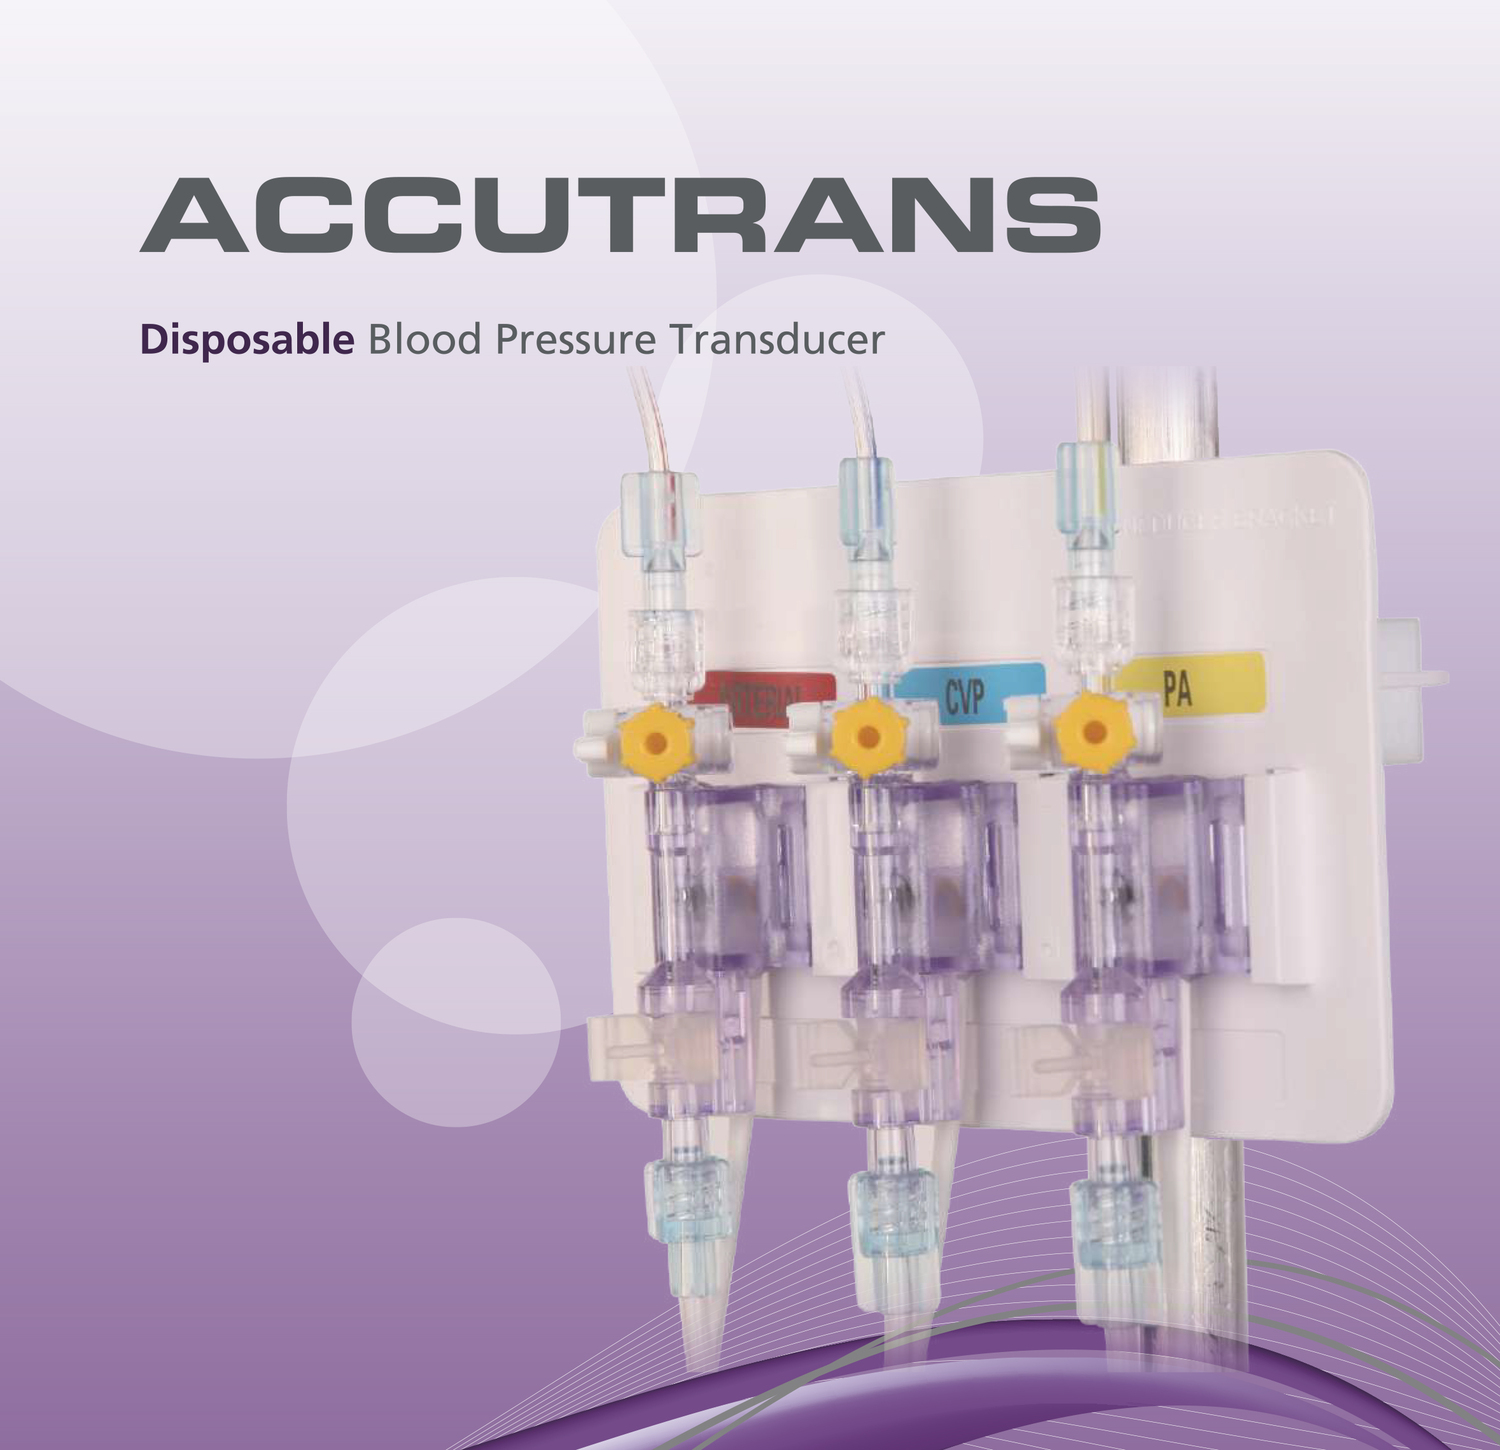 <p><span style="font-weight: bold;">ACCUTRANS blood pressure transducer</span><br></p>